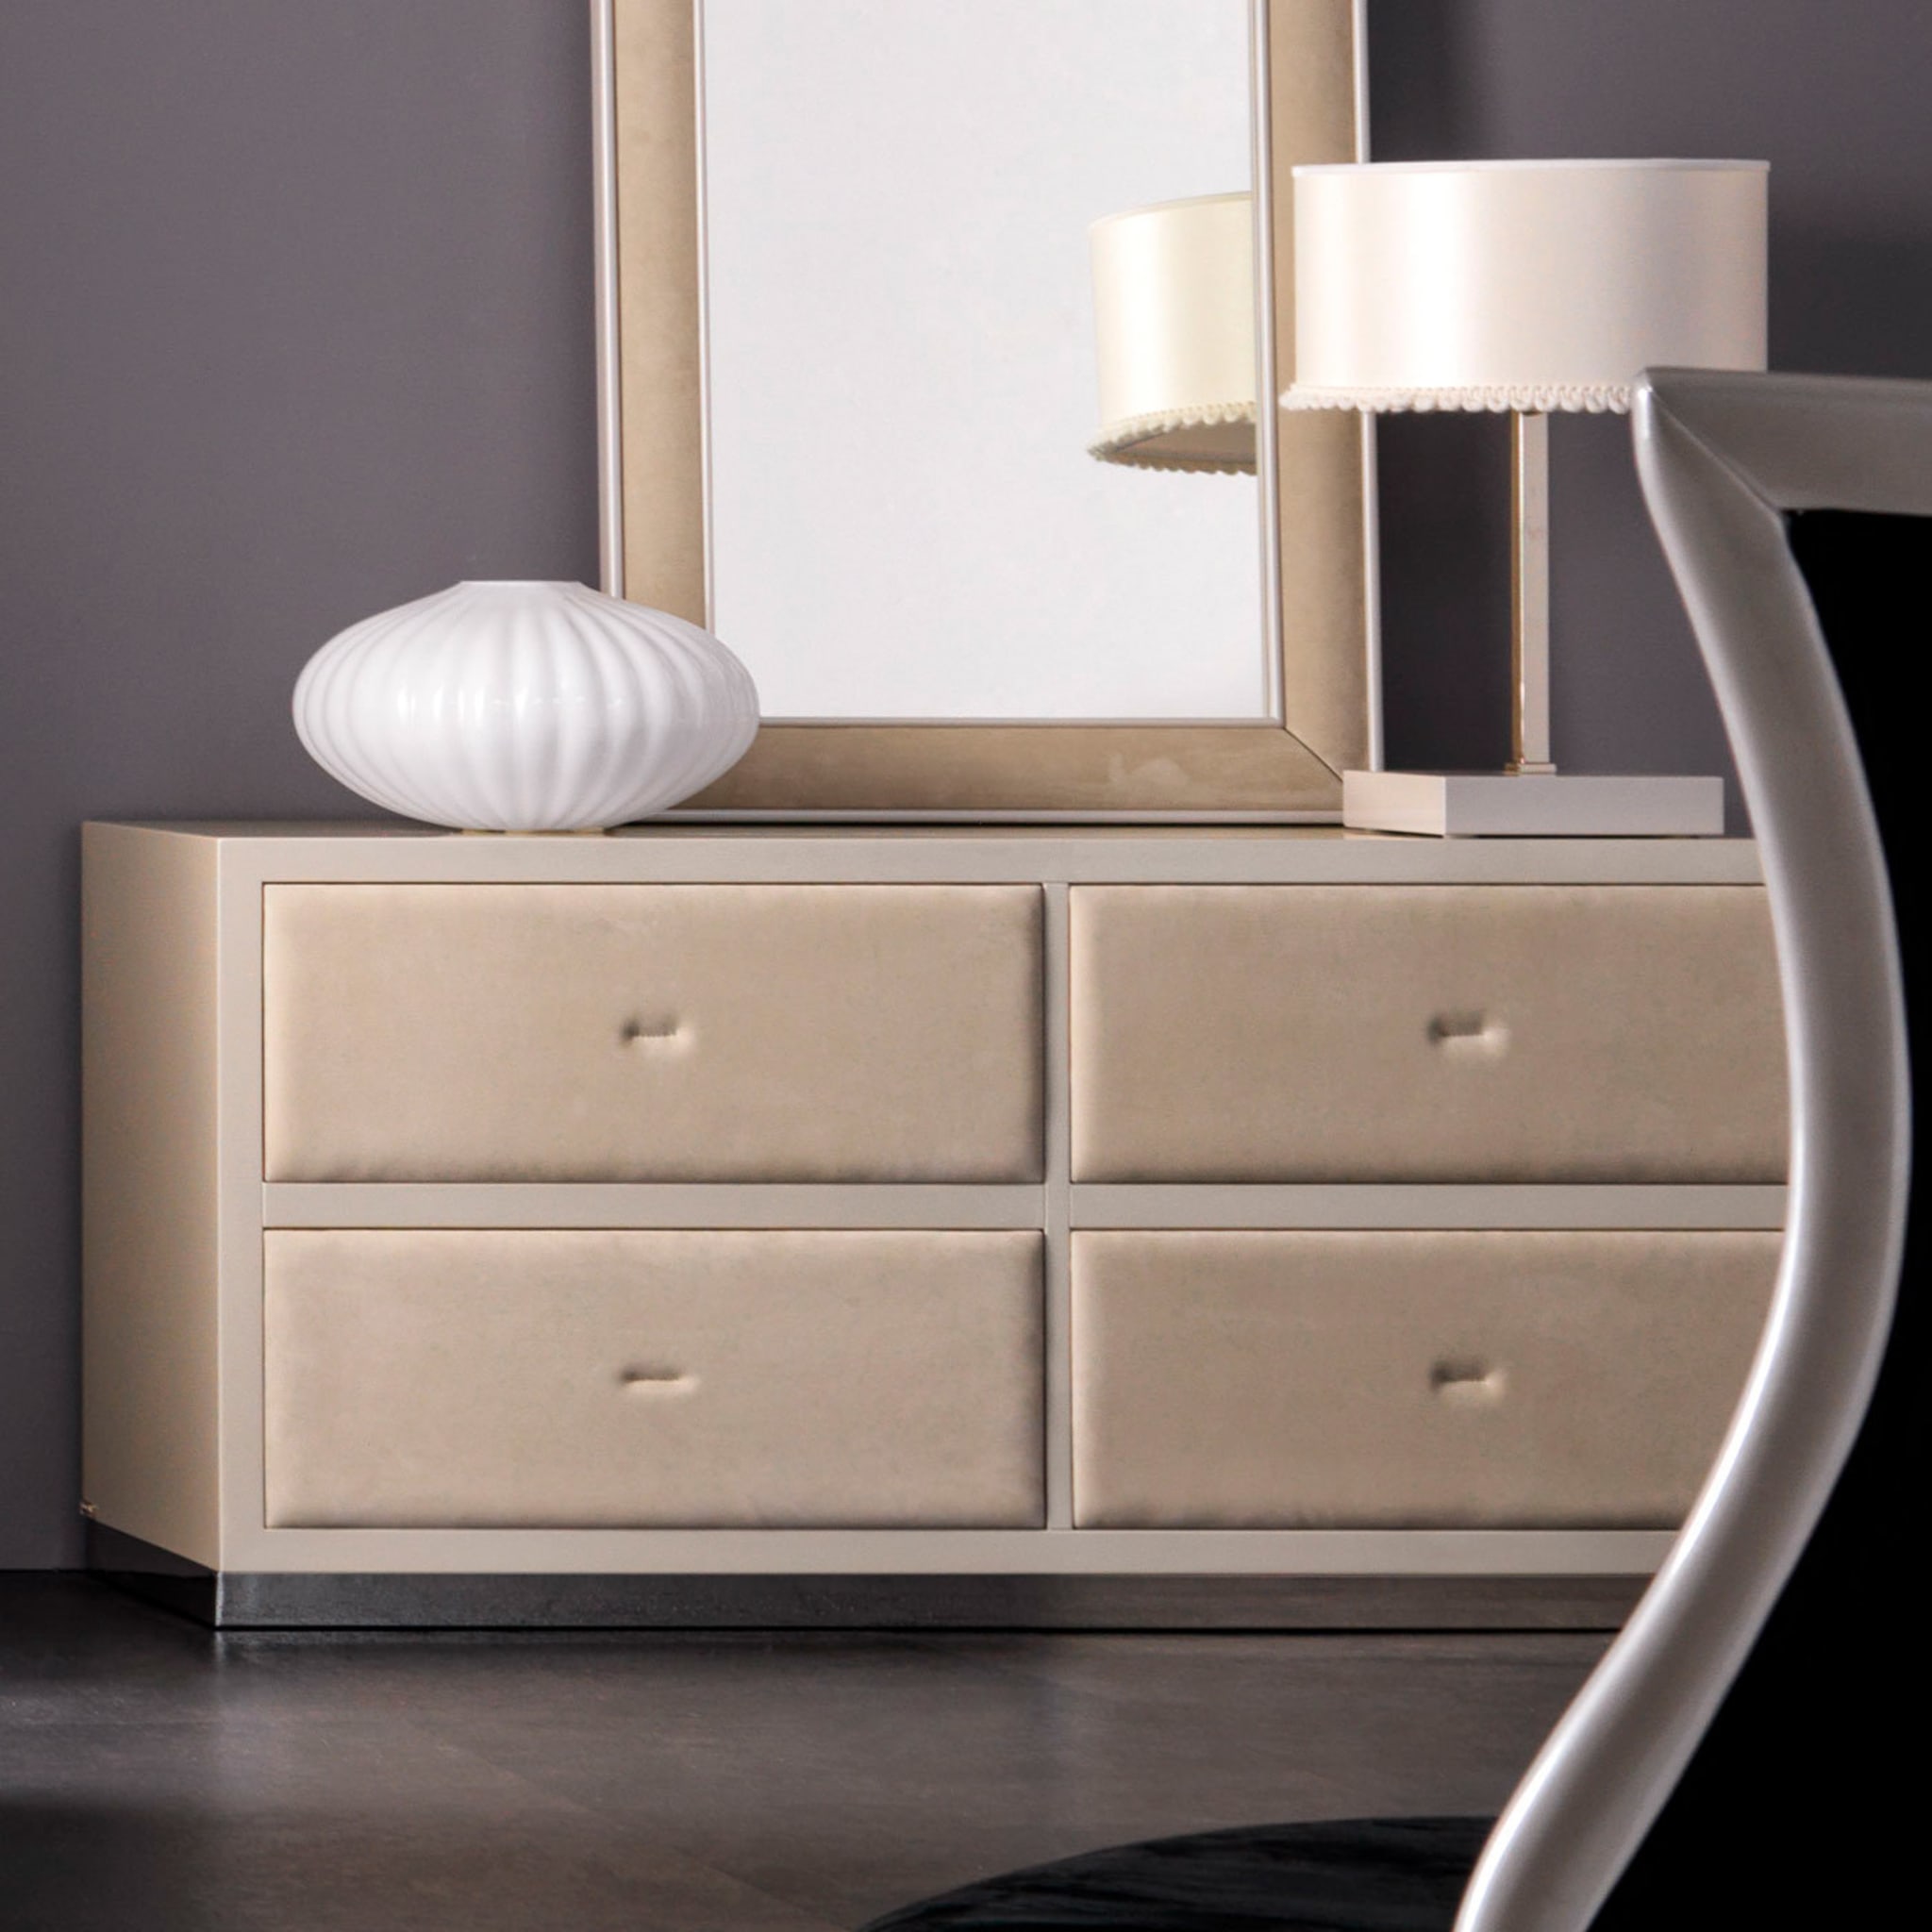 Keope Soft Beige Chest of Drawers - Alternative view 3